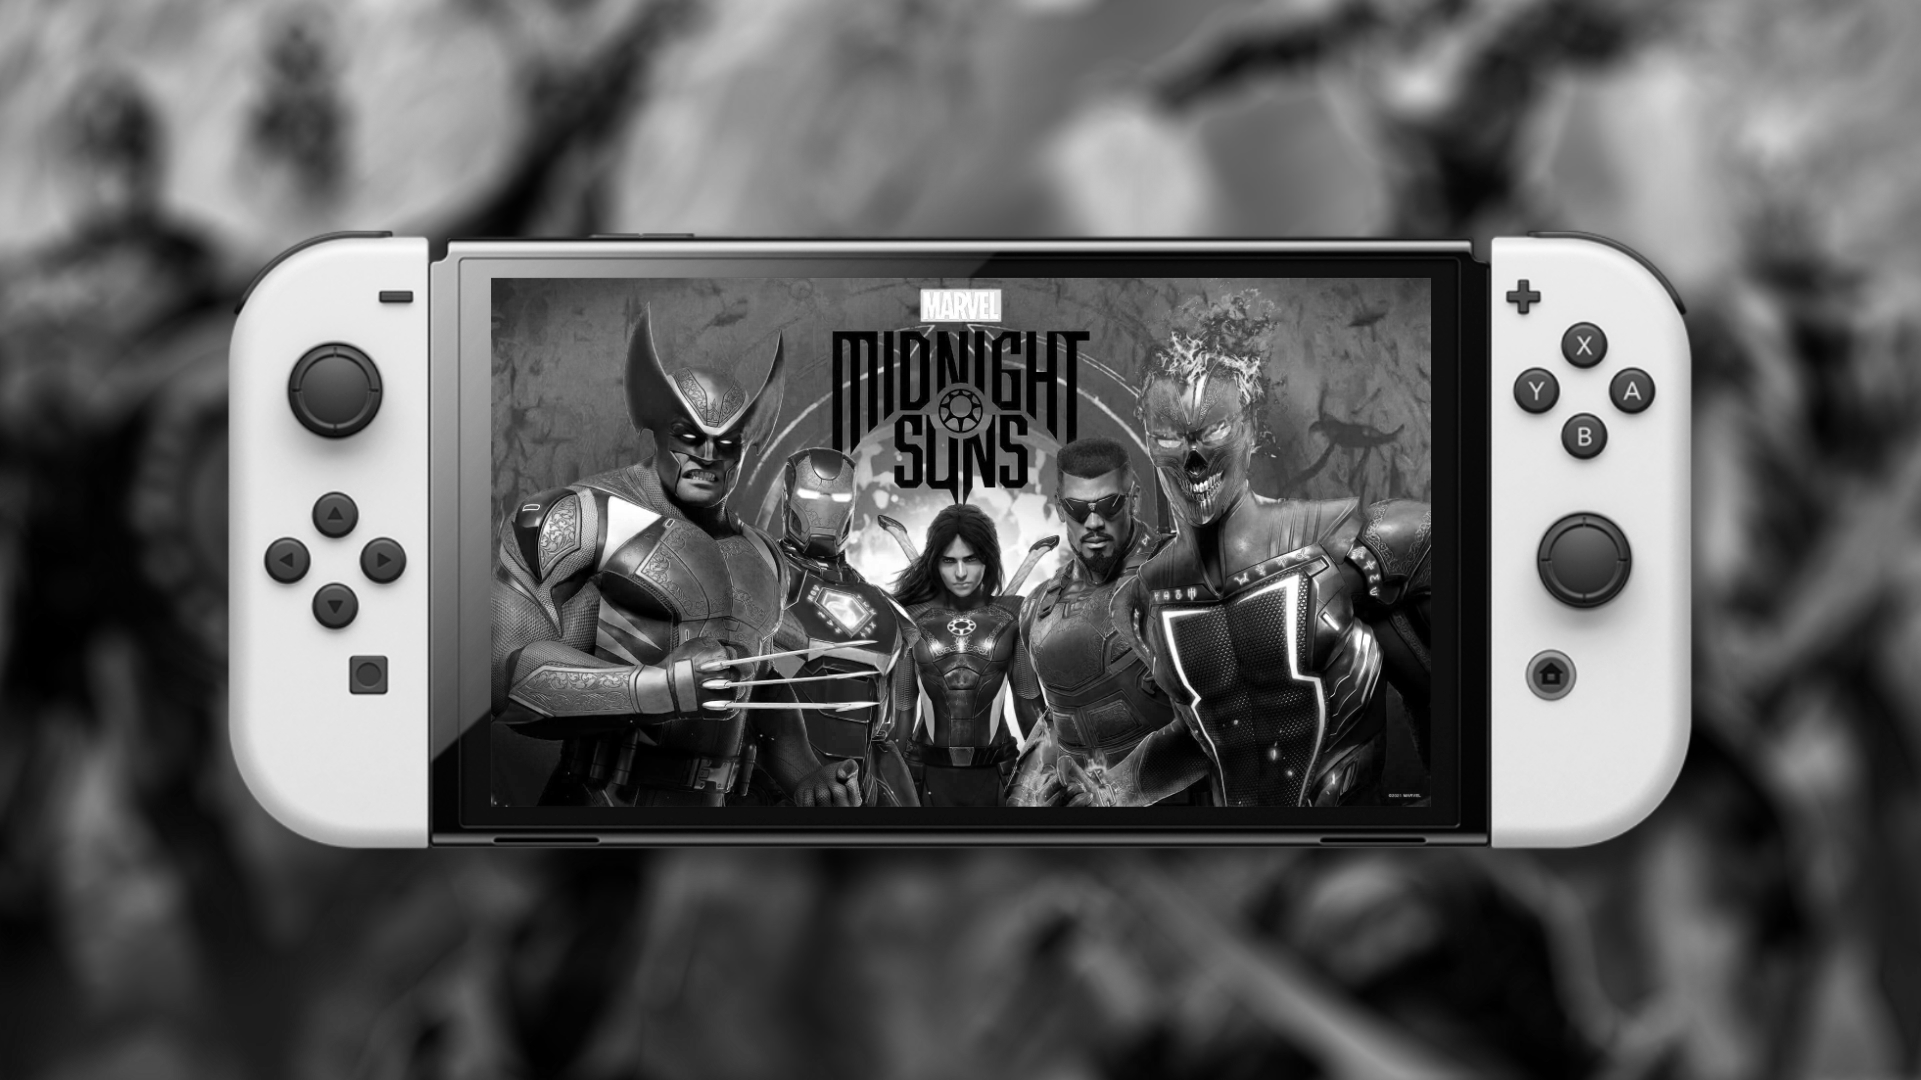 Marvel's Midnight Suns PS4, Xbox One Date Announced; Switch